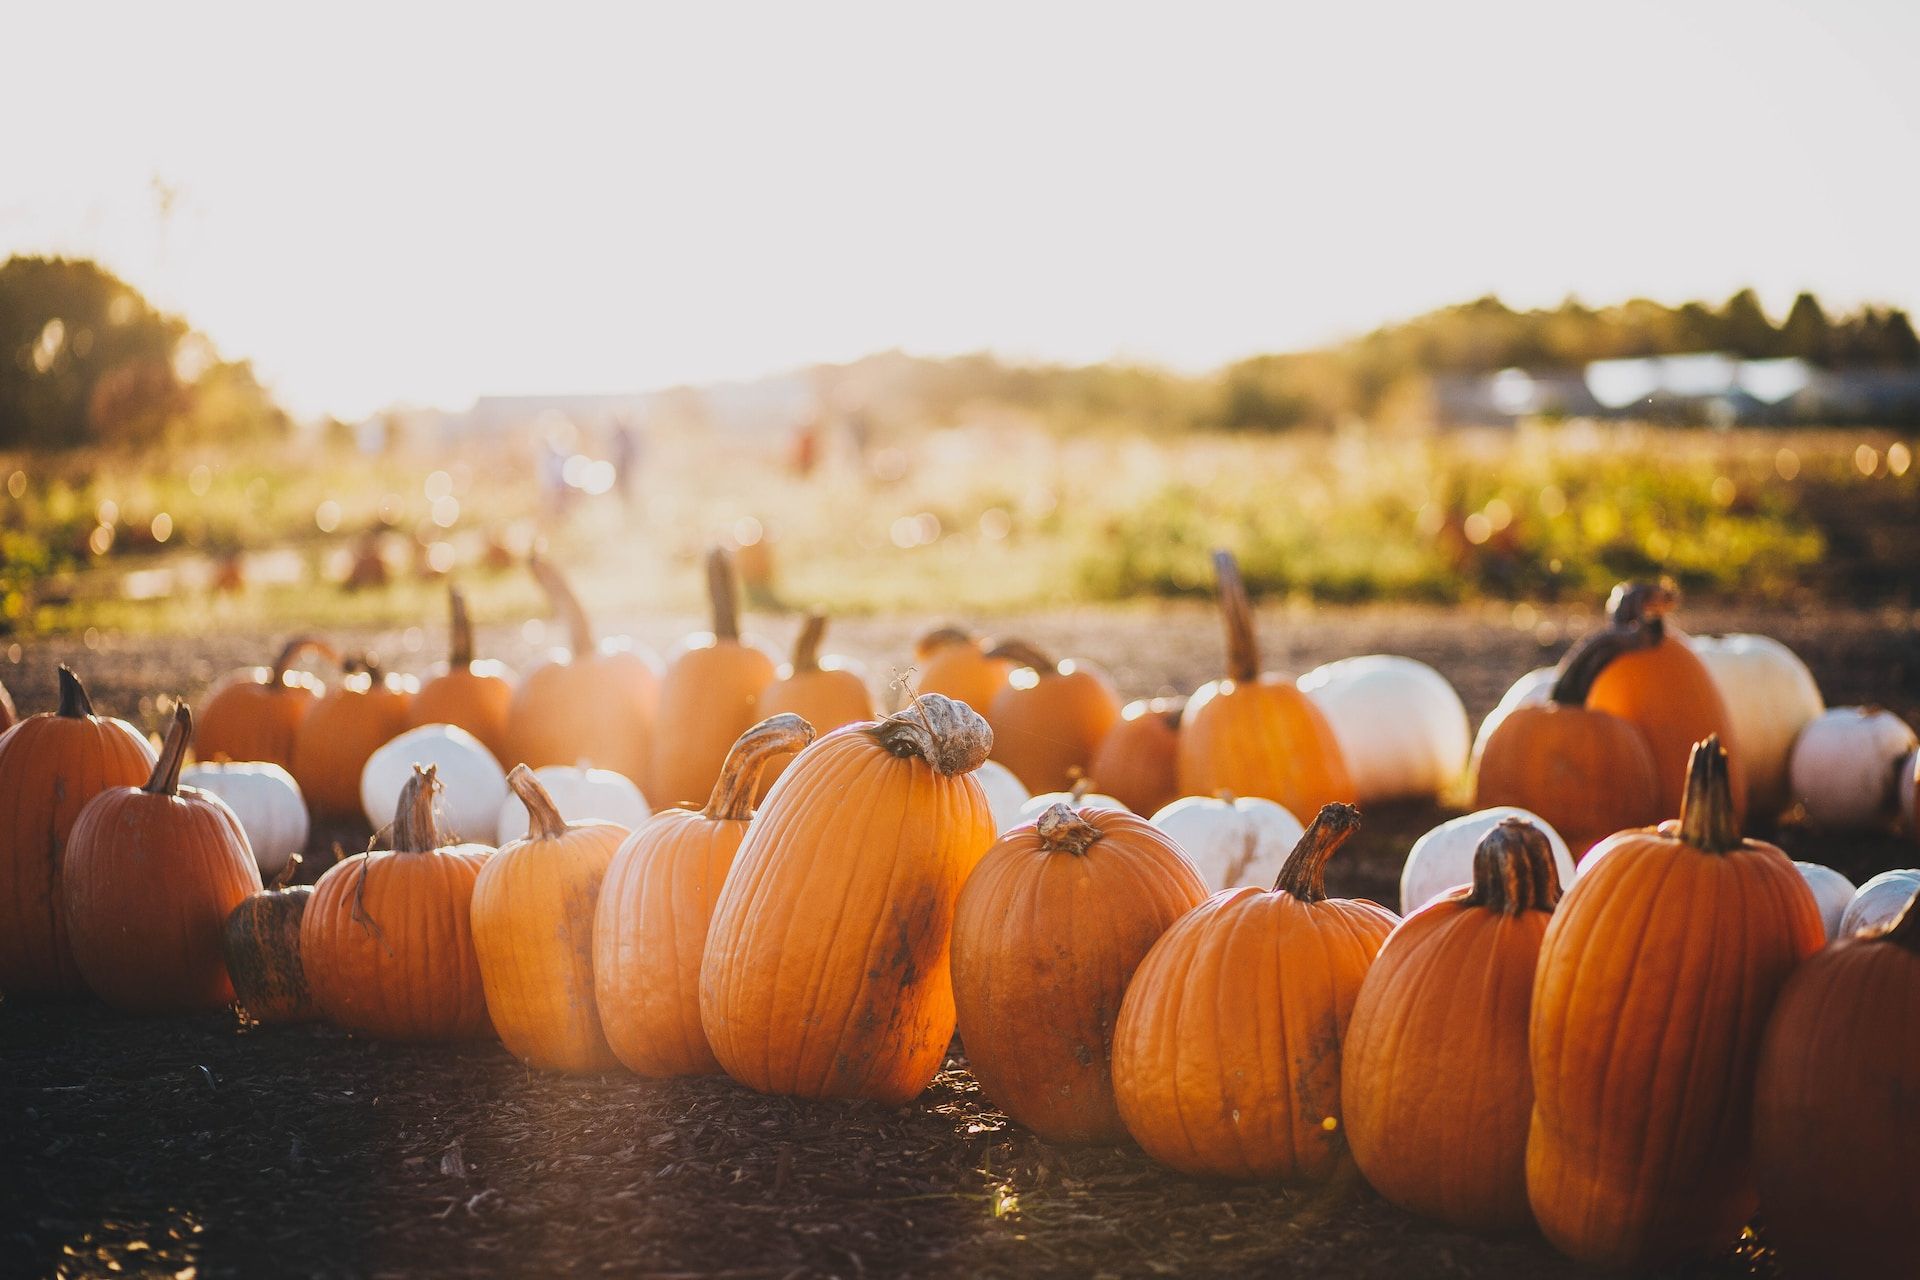 Celebrate the amazing Fall season with these fun activities